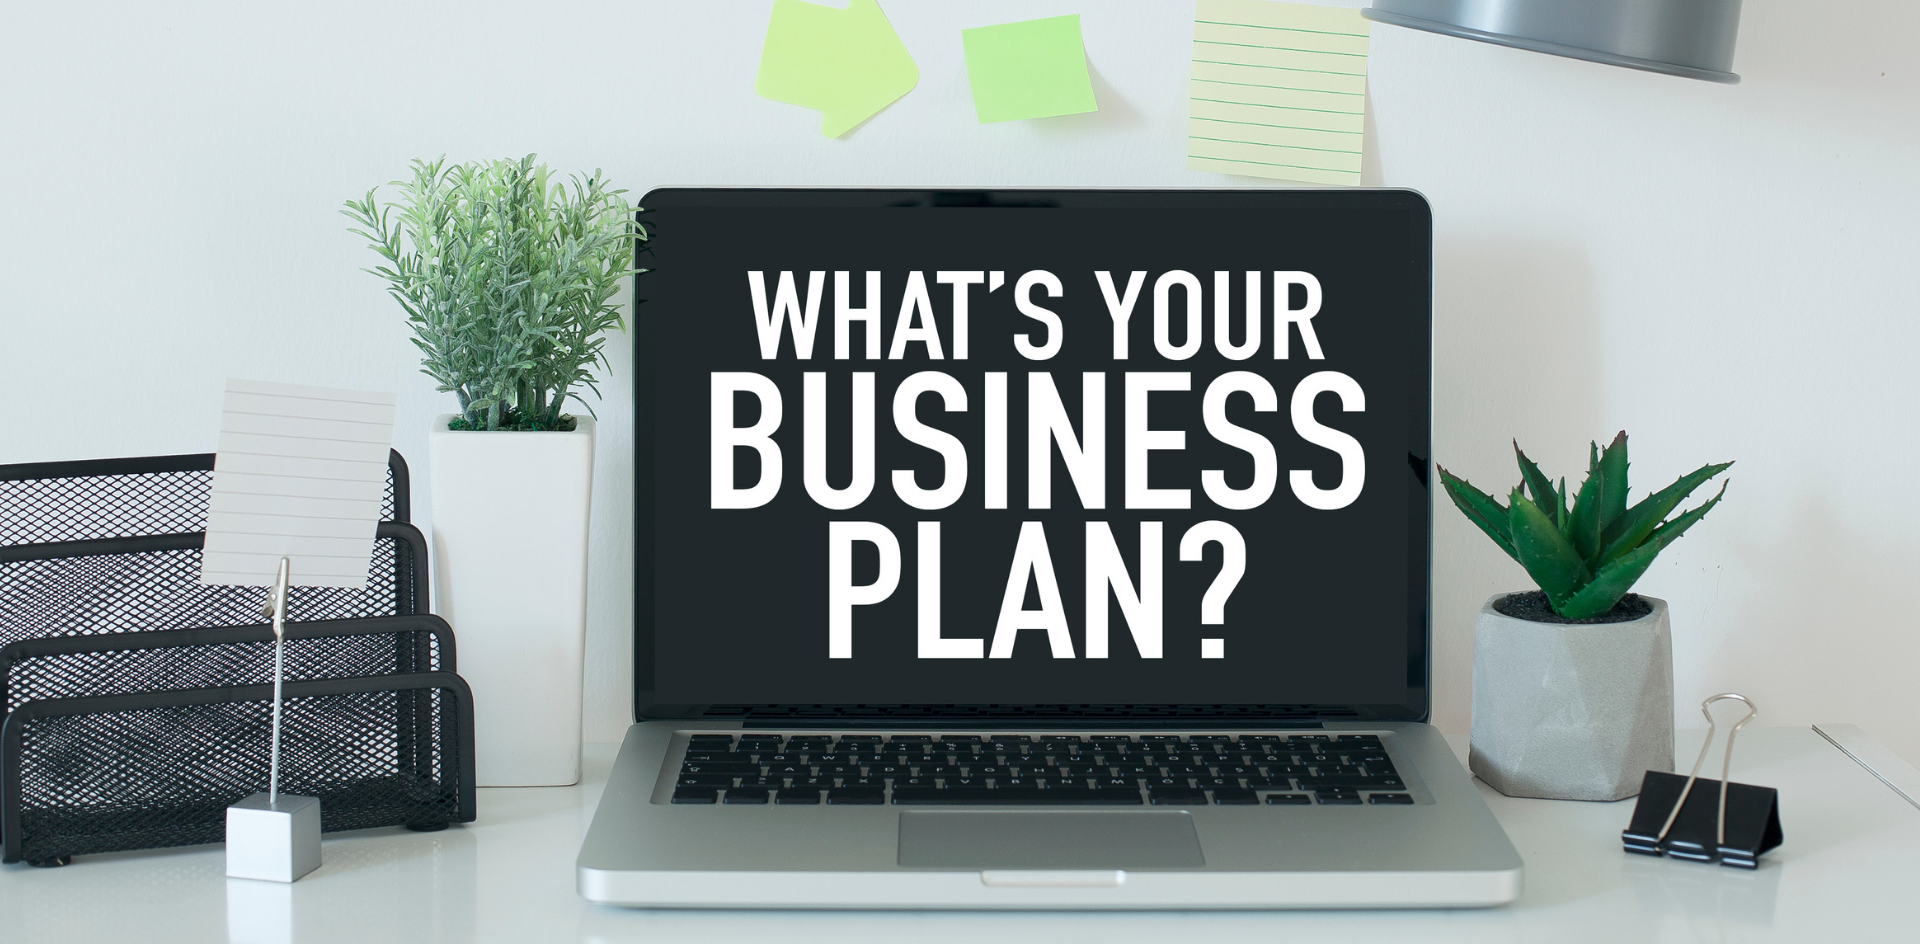 A computer is on a desk next to plants, a lamp and some pens. On the screen it is written "What's your next Business Plan?"